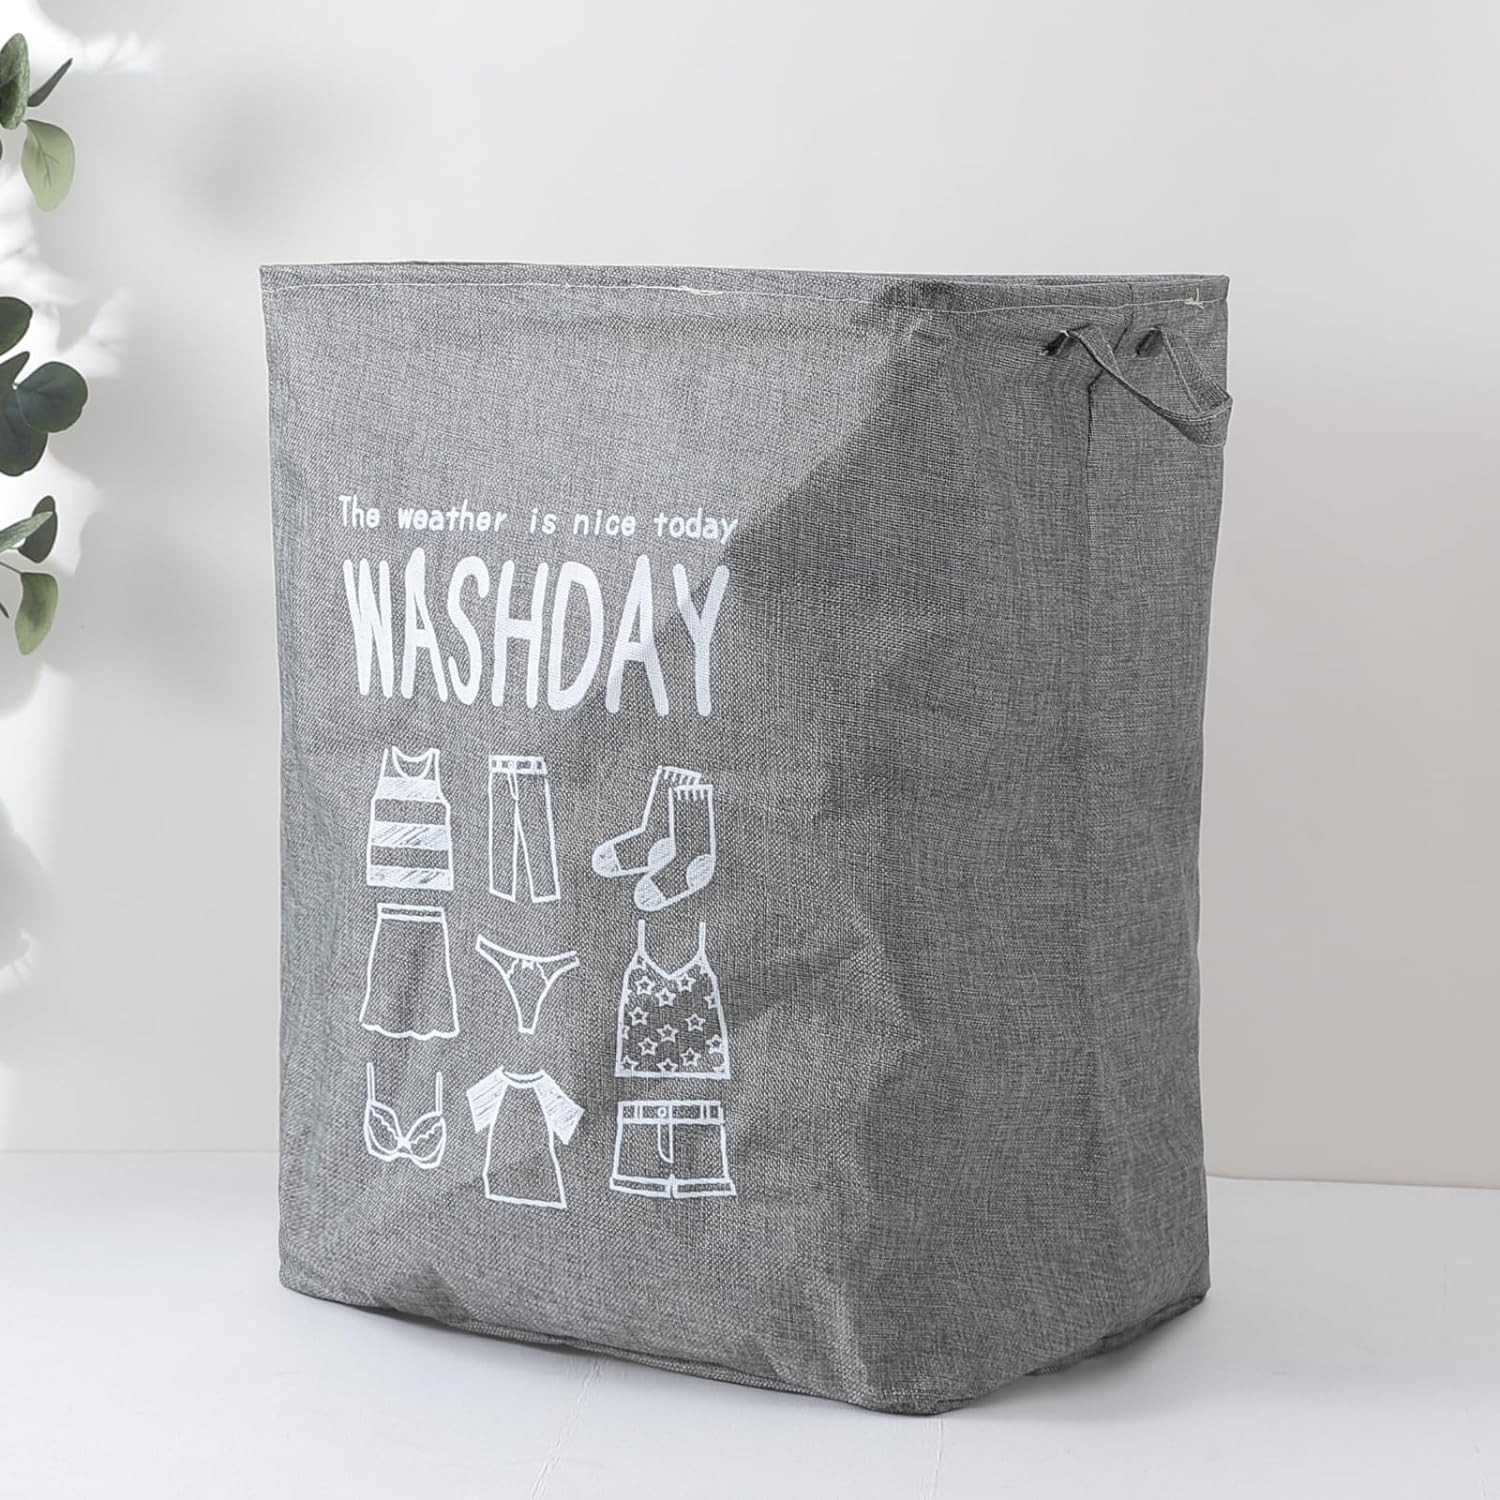 Kuber Industries Laundry Basket For Clothes|Foldable Laundry Hamper|Basket For Toys, Dirty clothes, Storage 